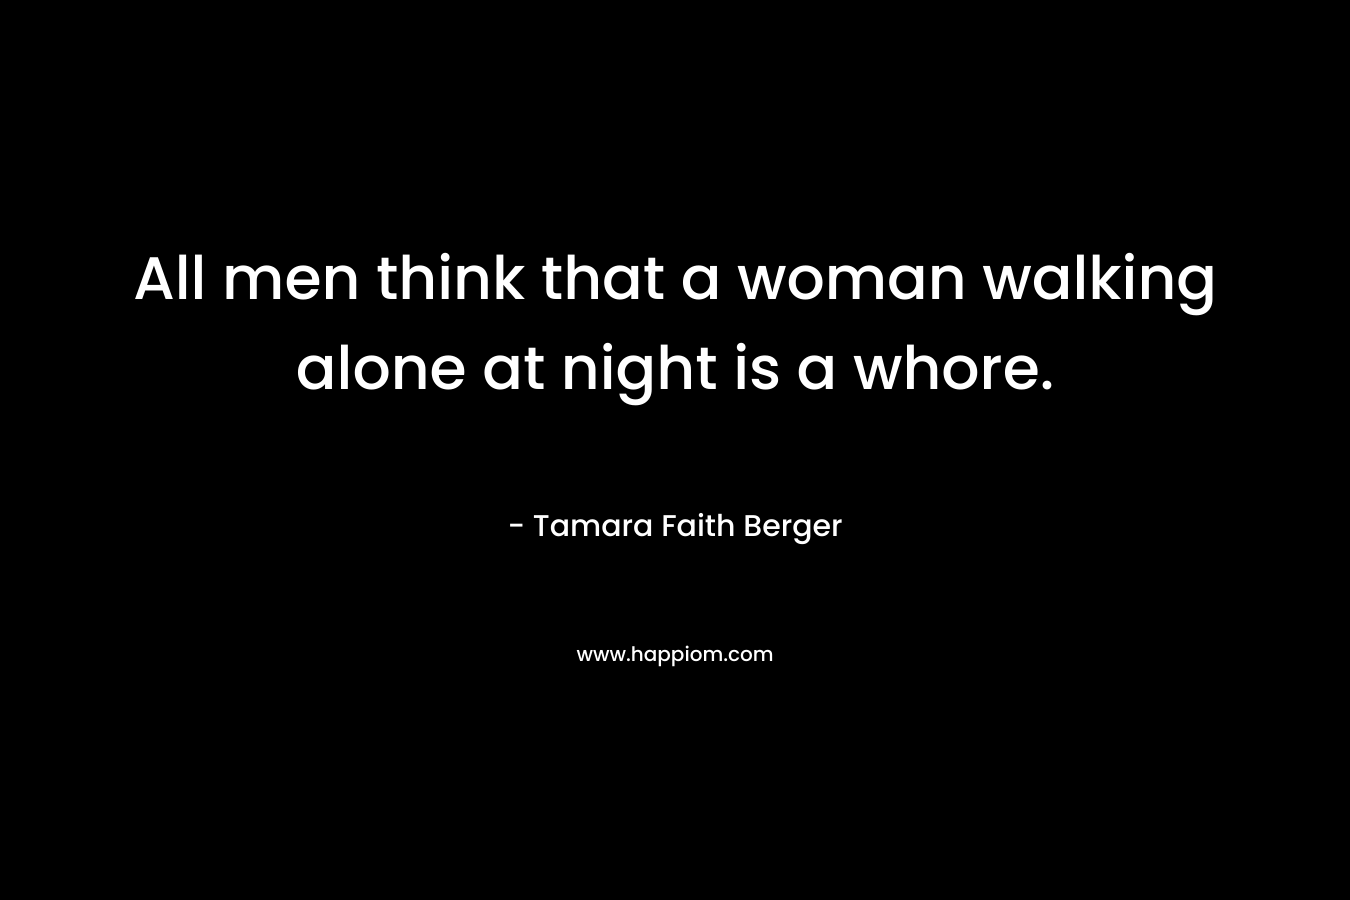 All men think that a woman walking alone at night is a whore.